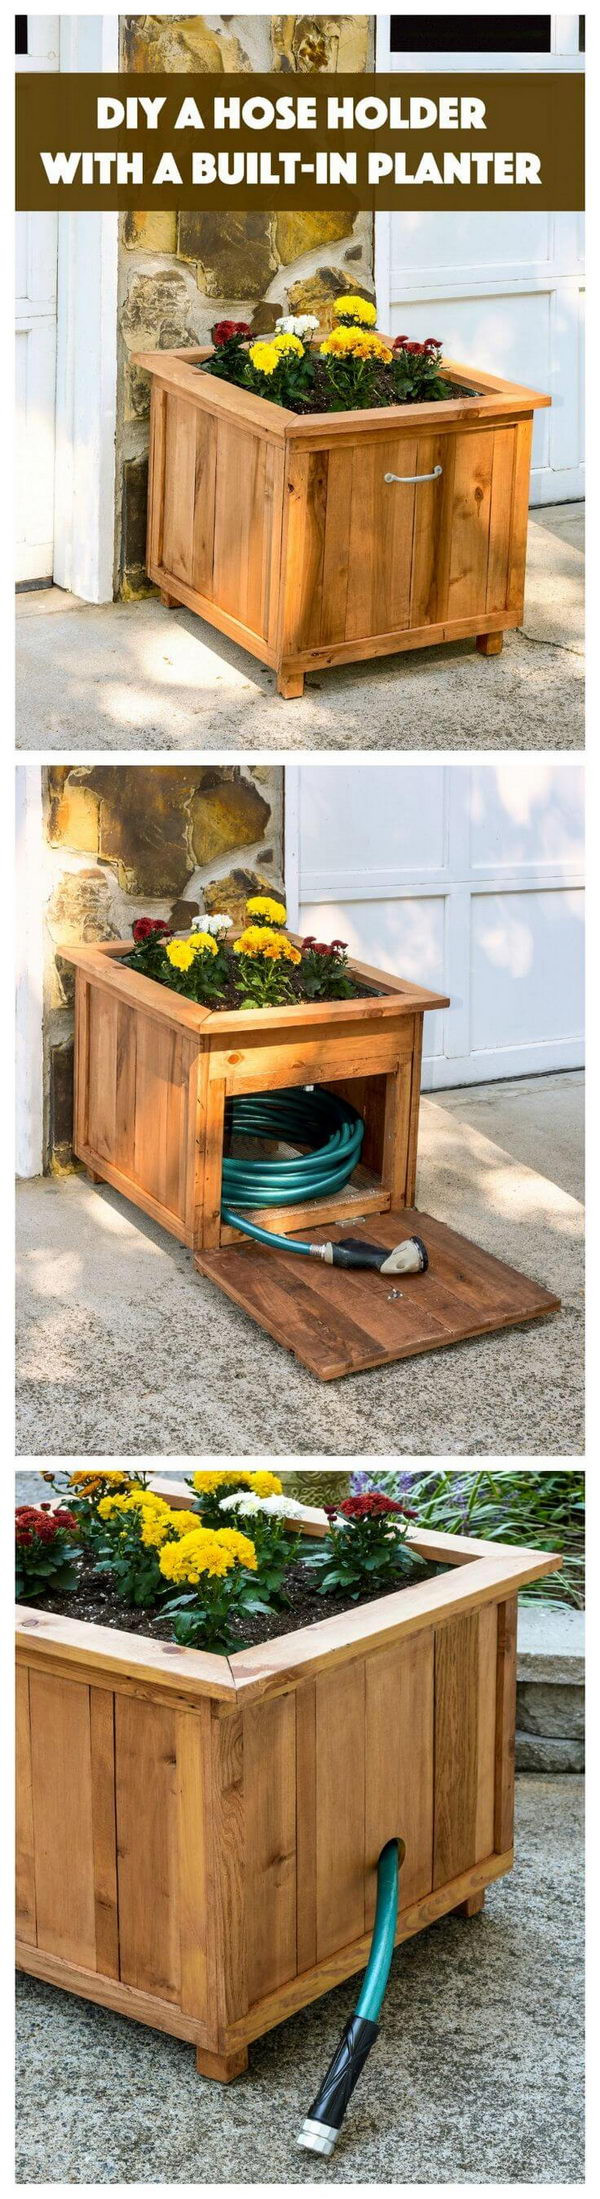 DIY Wooden Flower Box
 30 Creative DIY Wood and Pallet Planter Boxes To Style Up